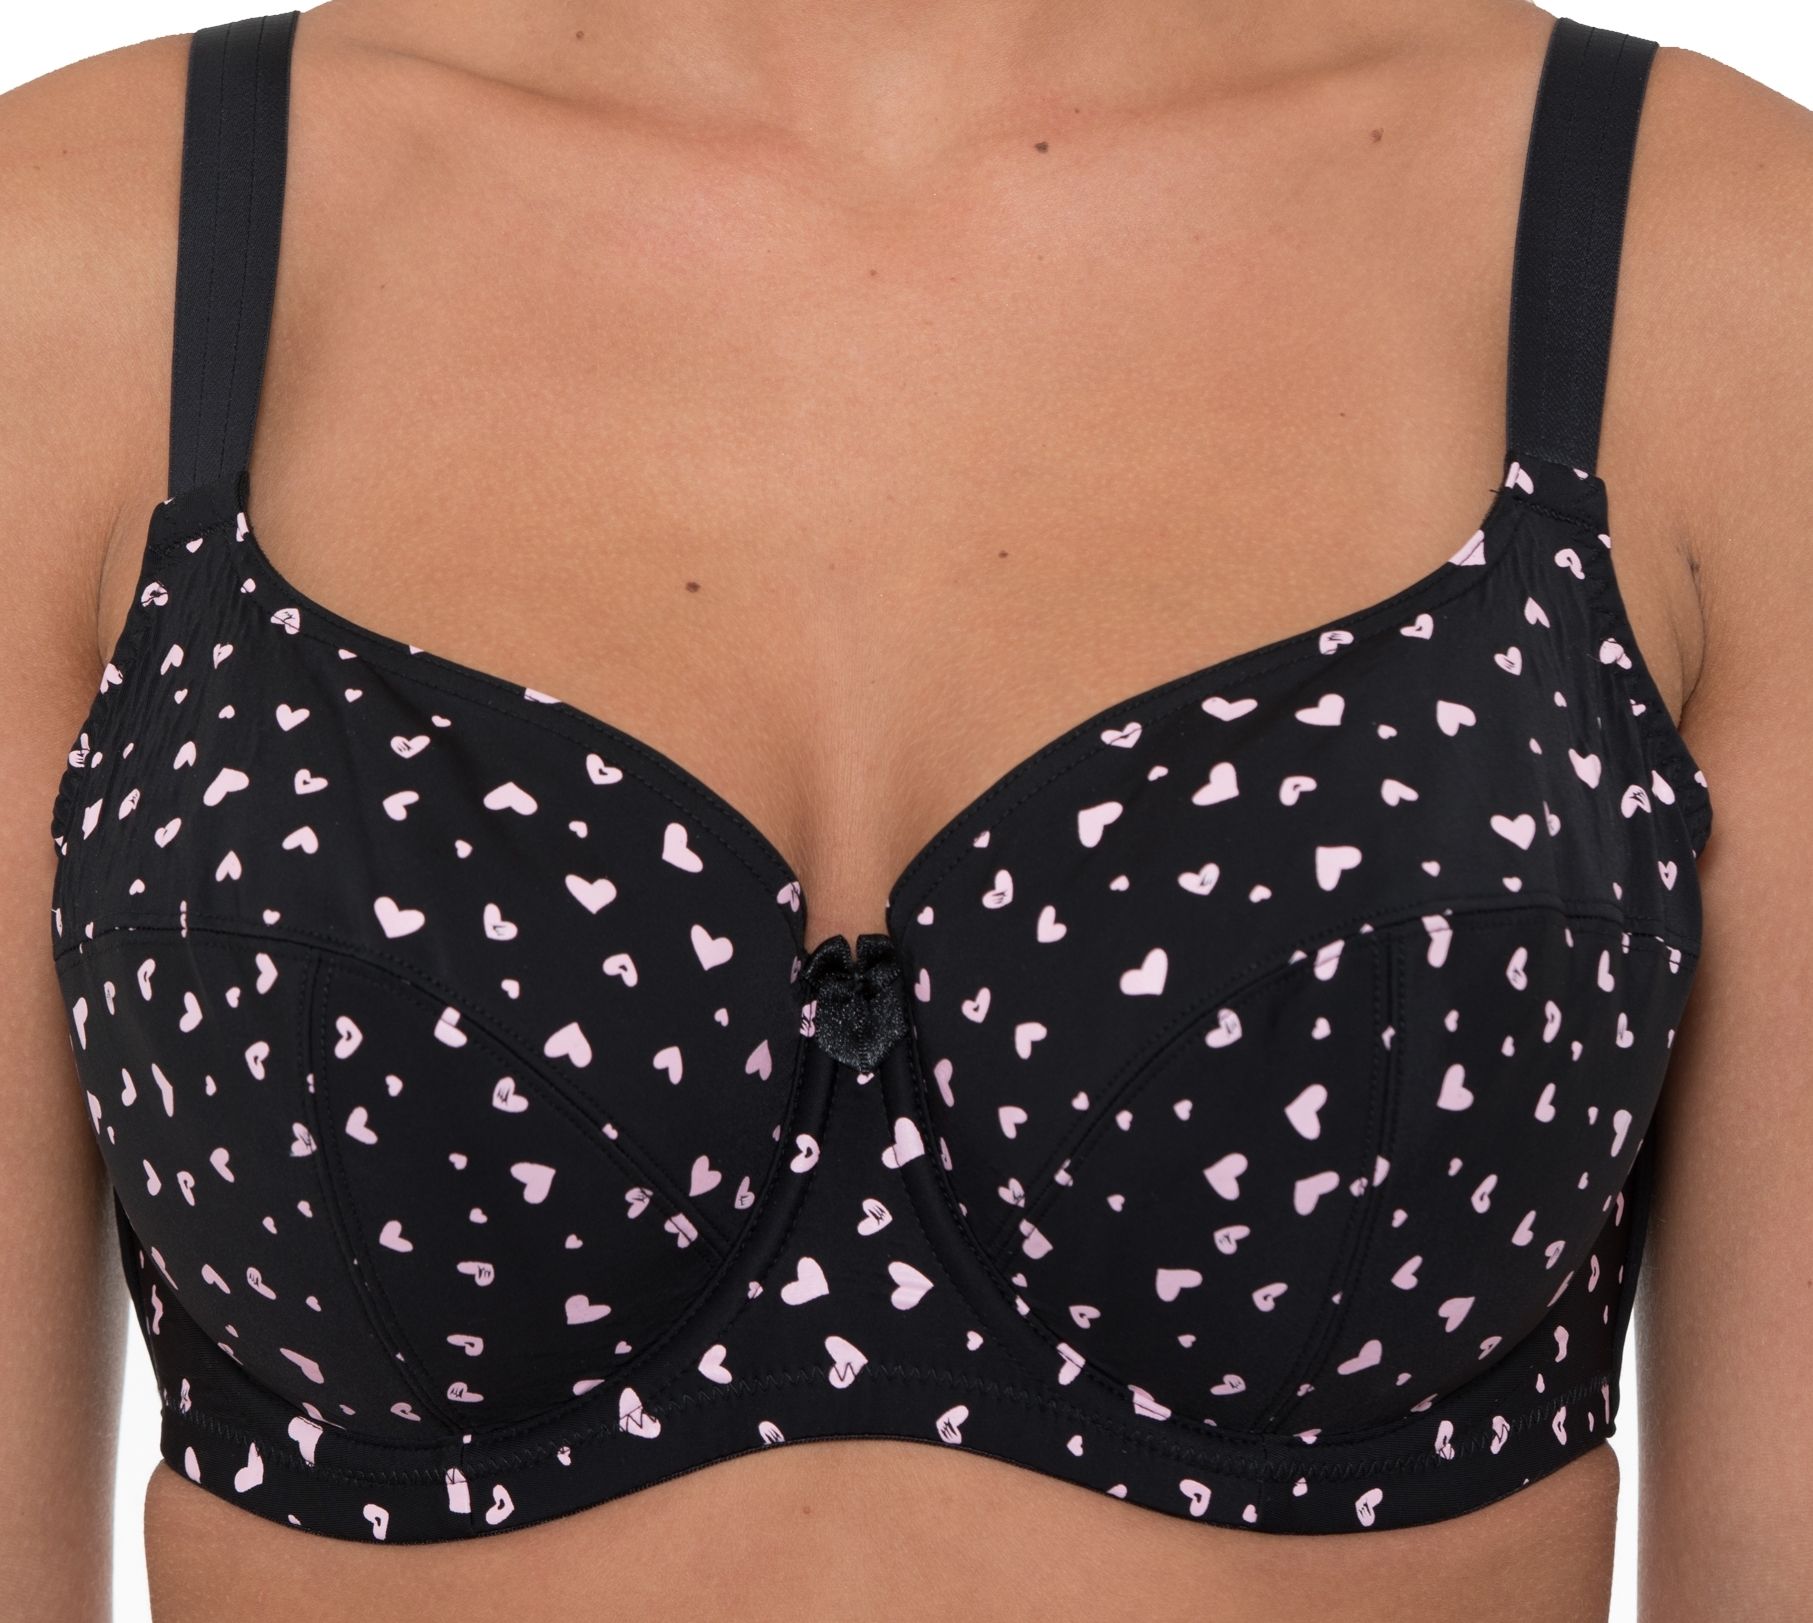 Plus Size Black with Pink Hearts Underwired plus size bra